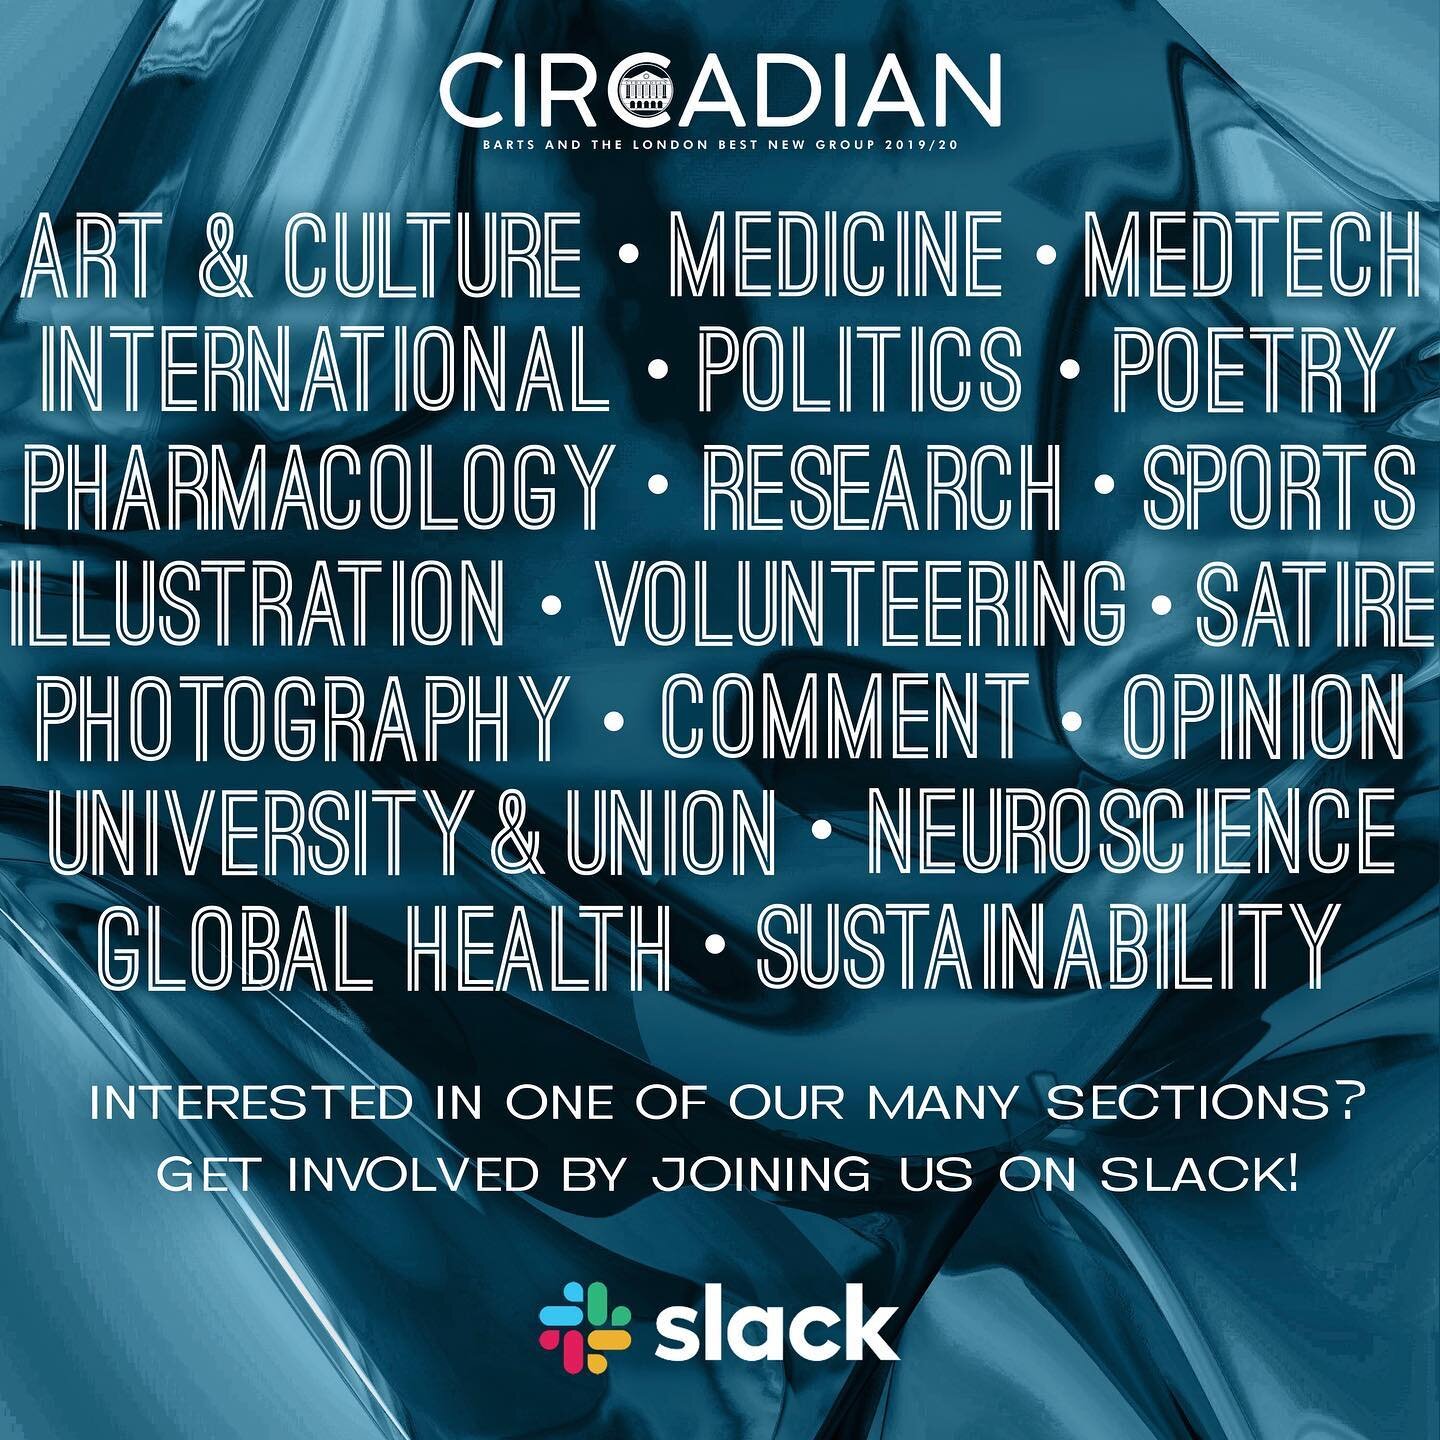 Hello everyone! We hope you are all doing well and are excited for September. As anticipated, we&rsquo;re ready for an even bigger and better second year for The Circadian and we would love for all of you to get involved! With a ton of interesting se